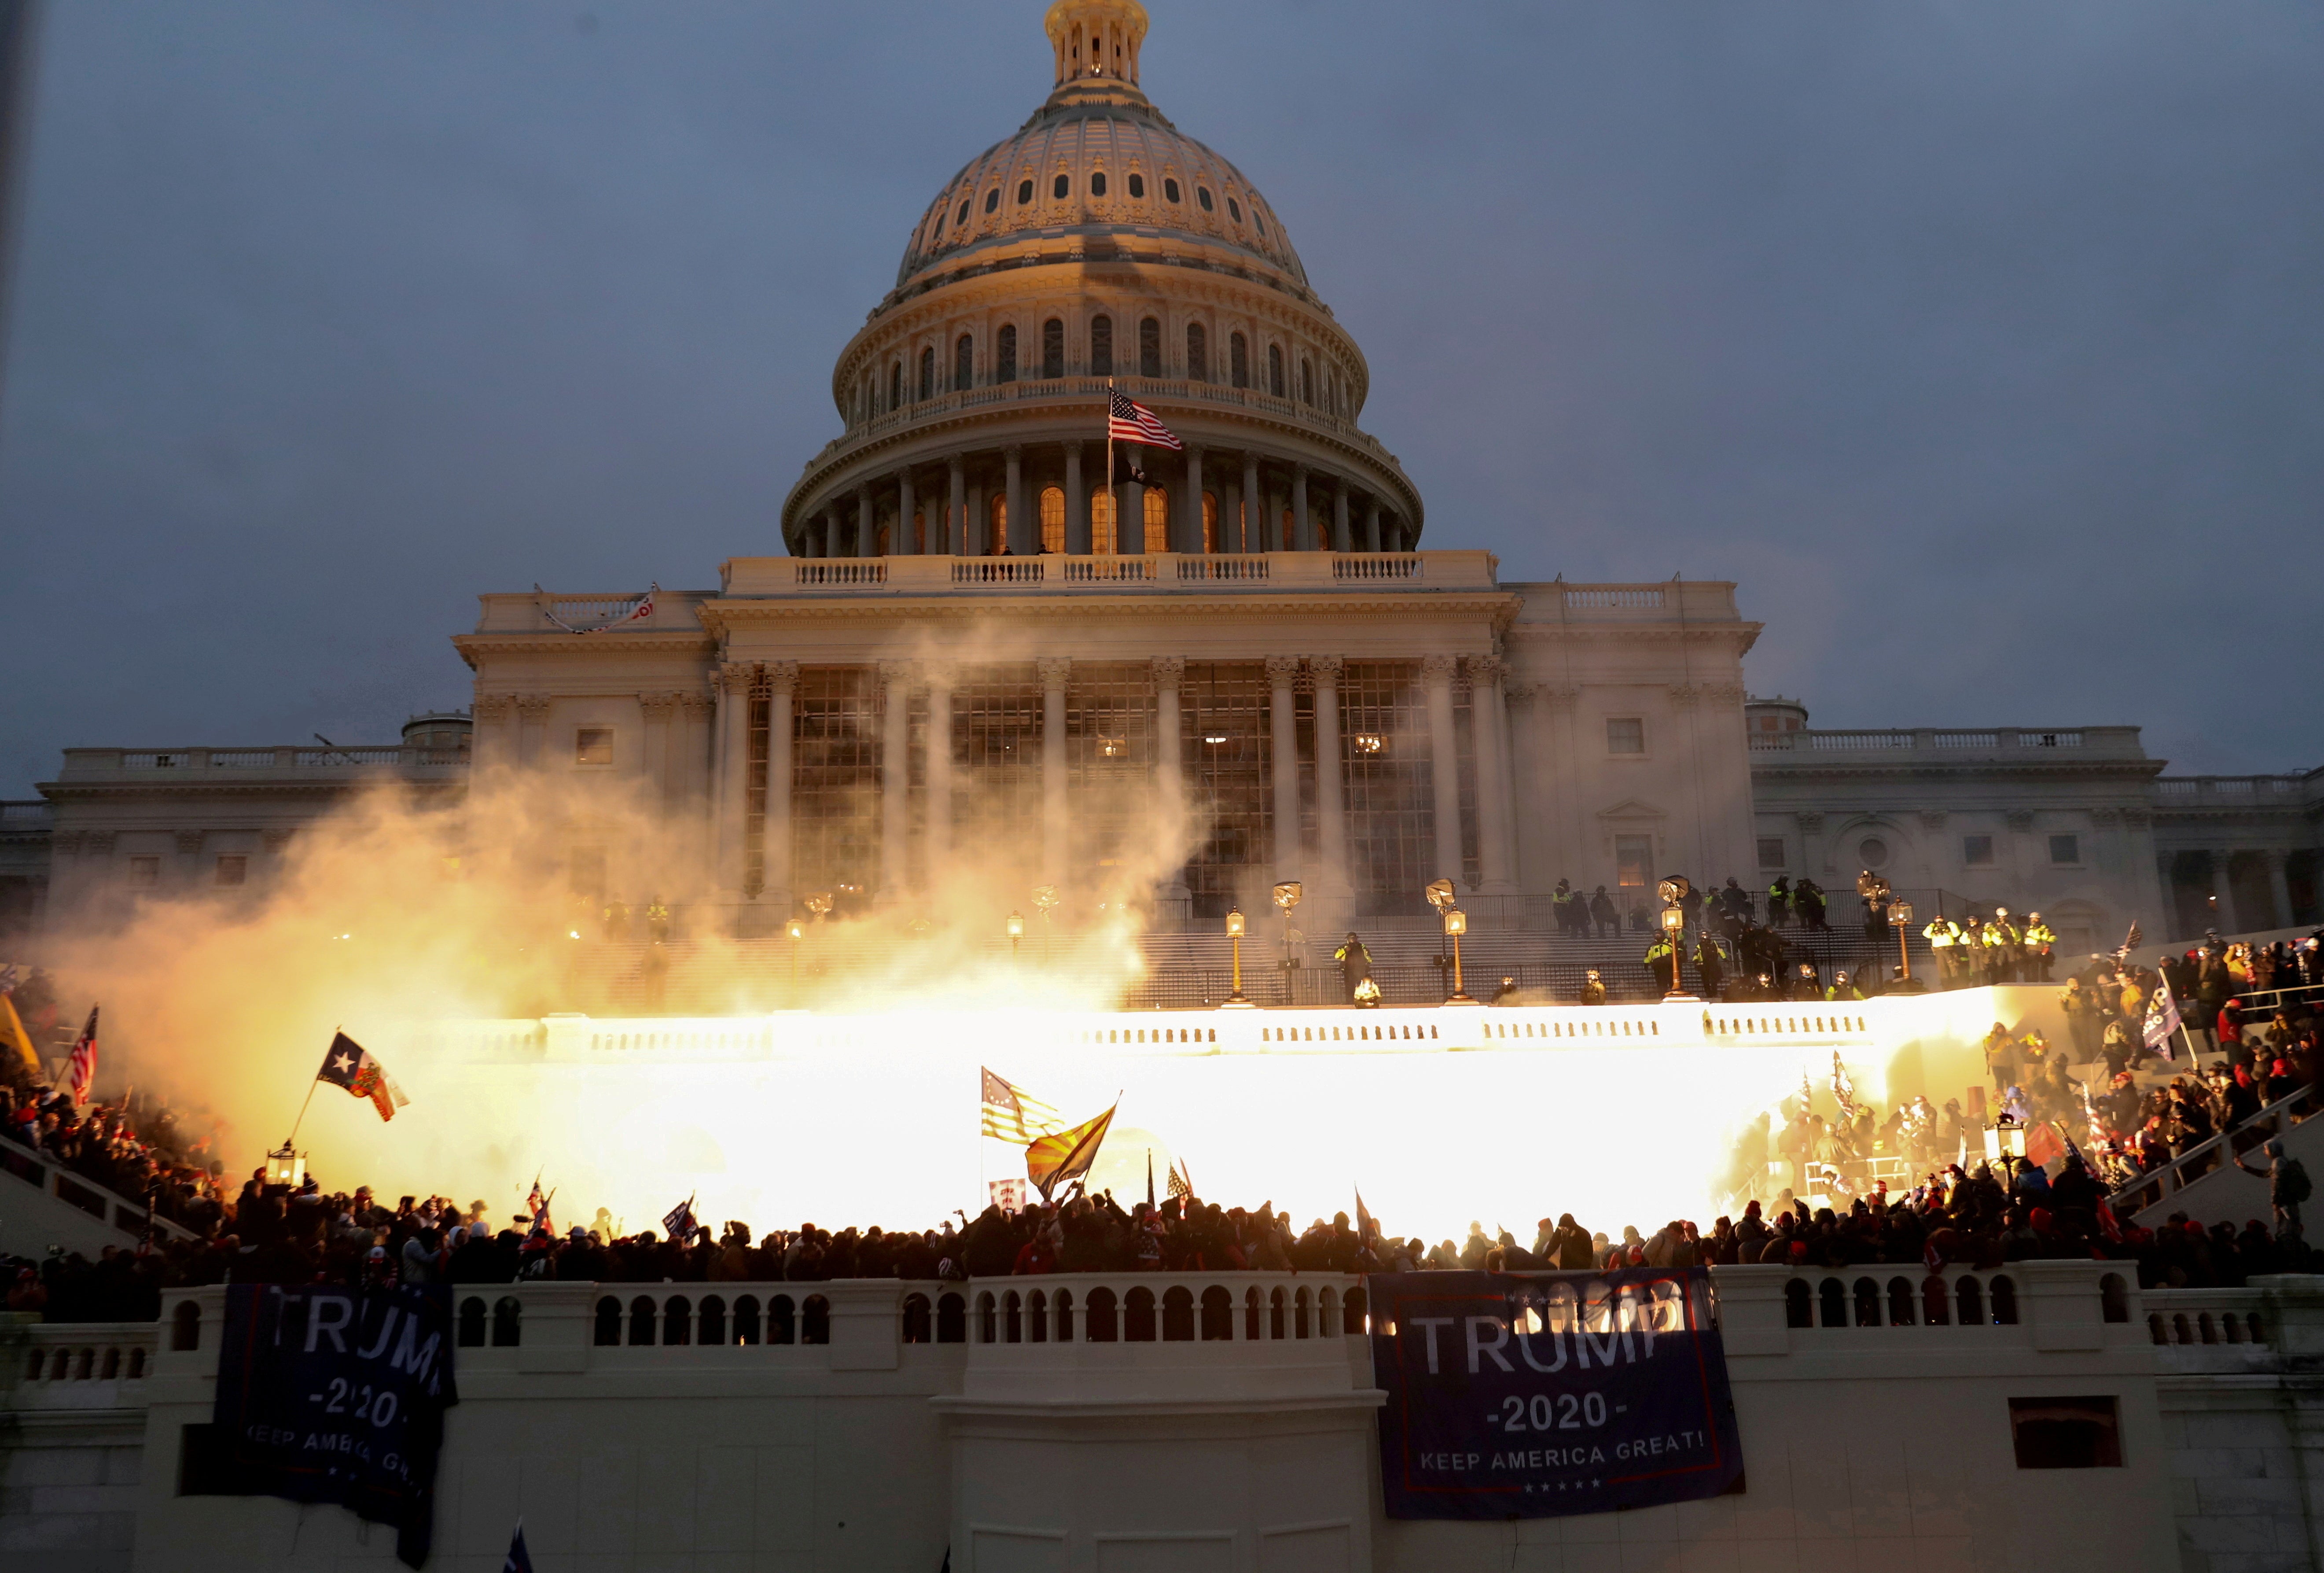 An explosion caused by a police munition as Trump supporters stormed the Capitol on 6 January 2021